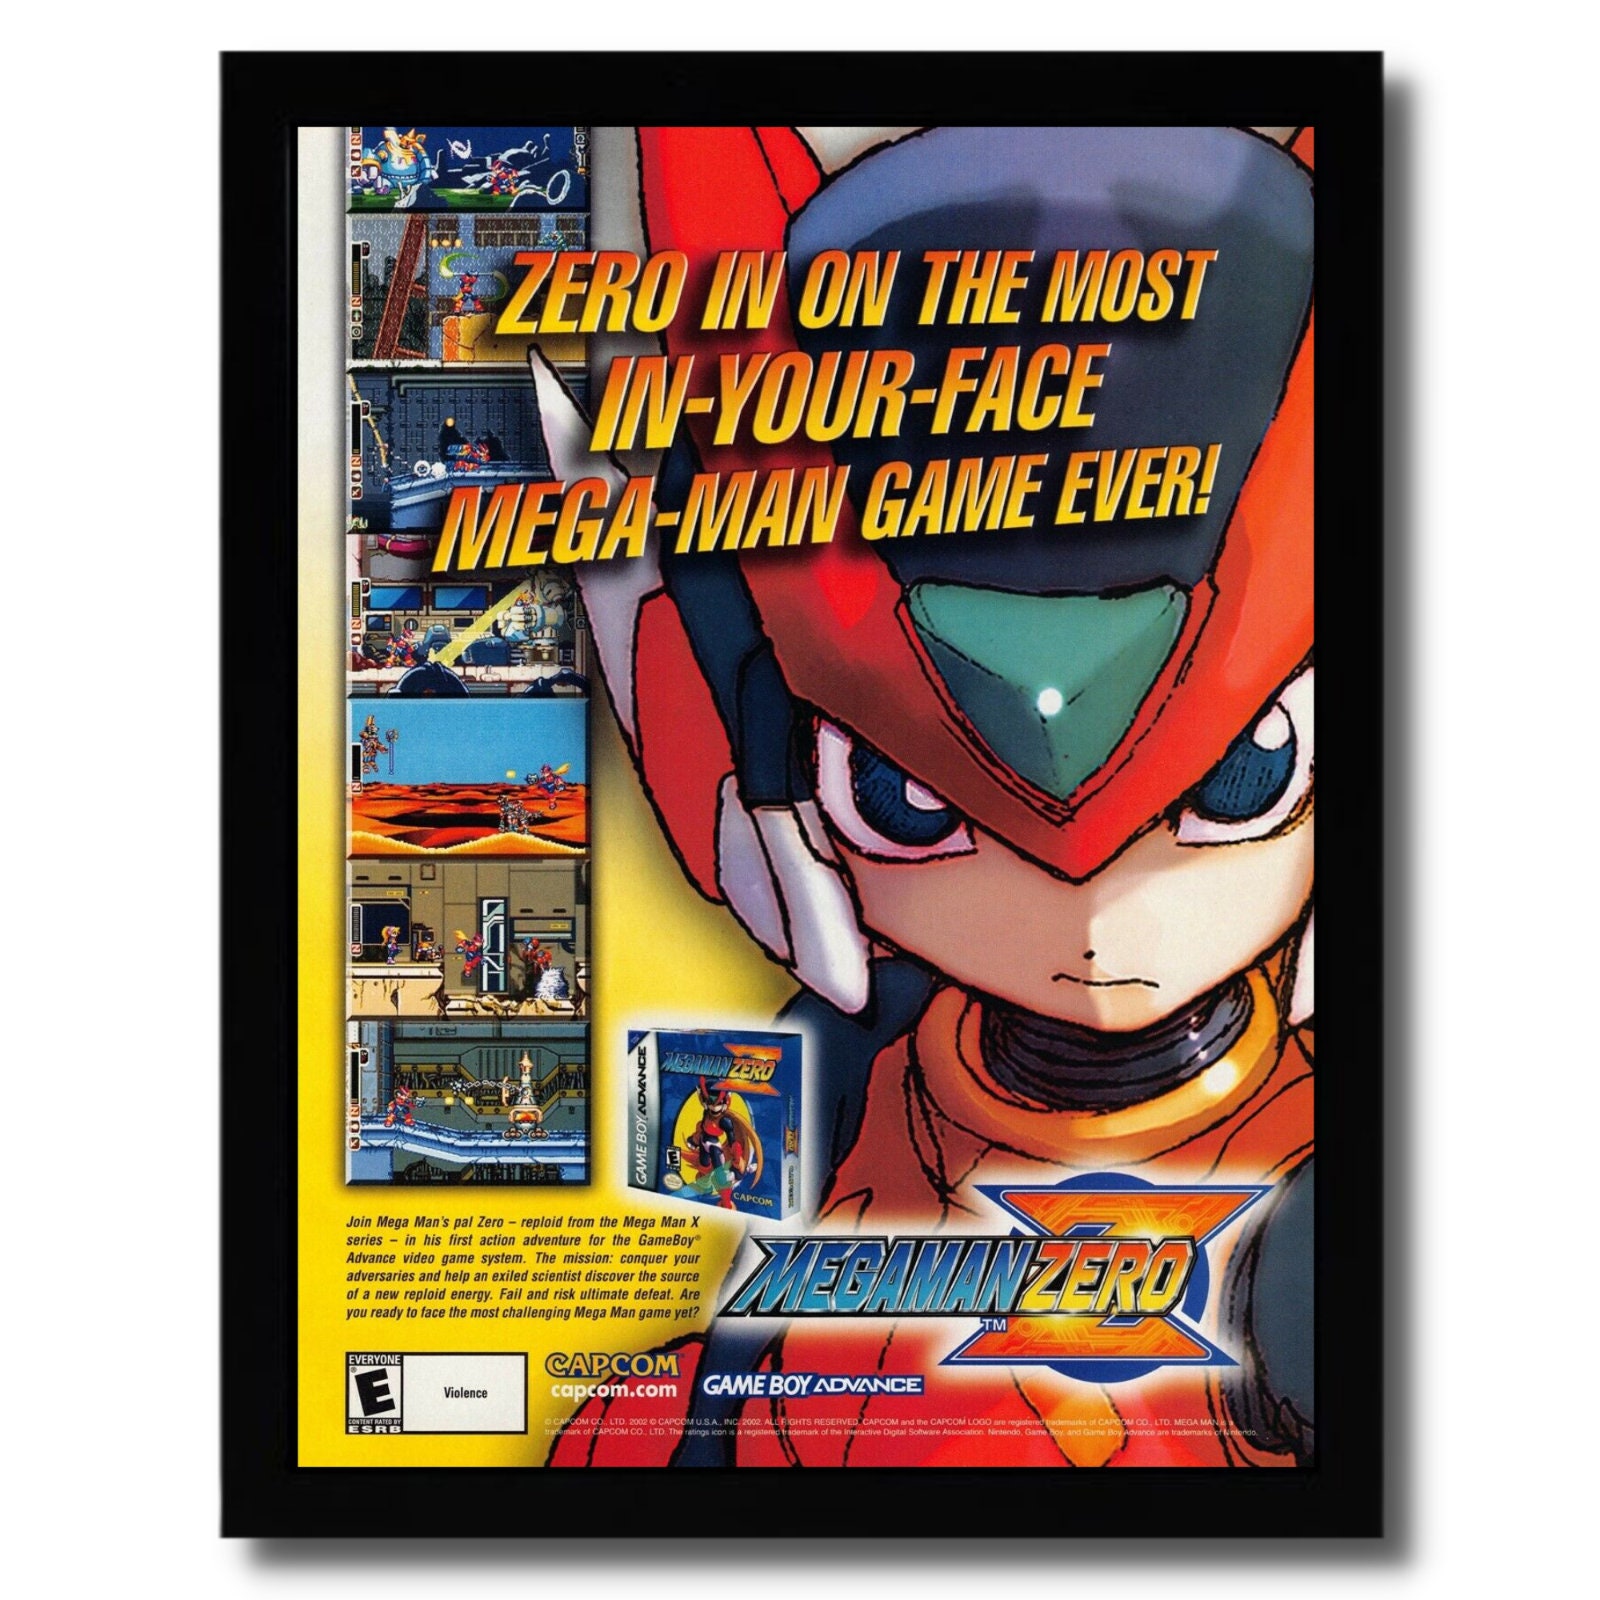 Pretty cool Sonic/Megaman advertisment for Xbox Game Pass : r